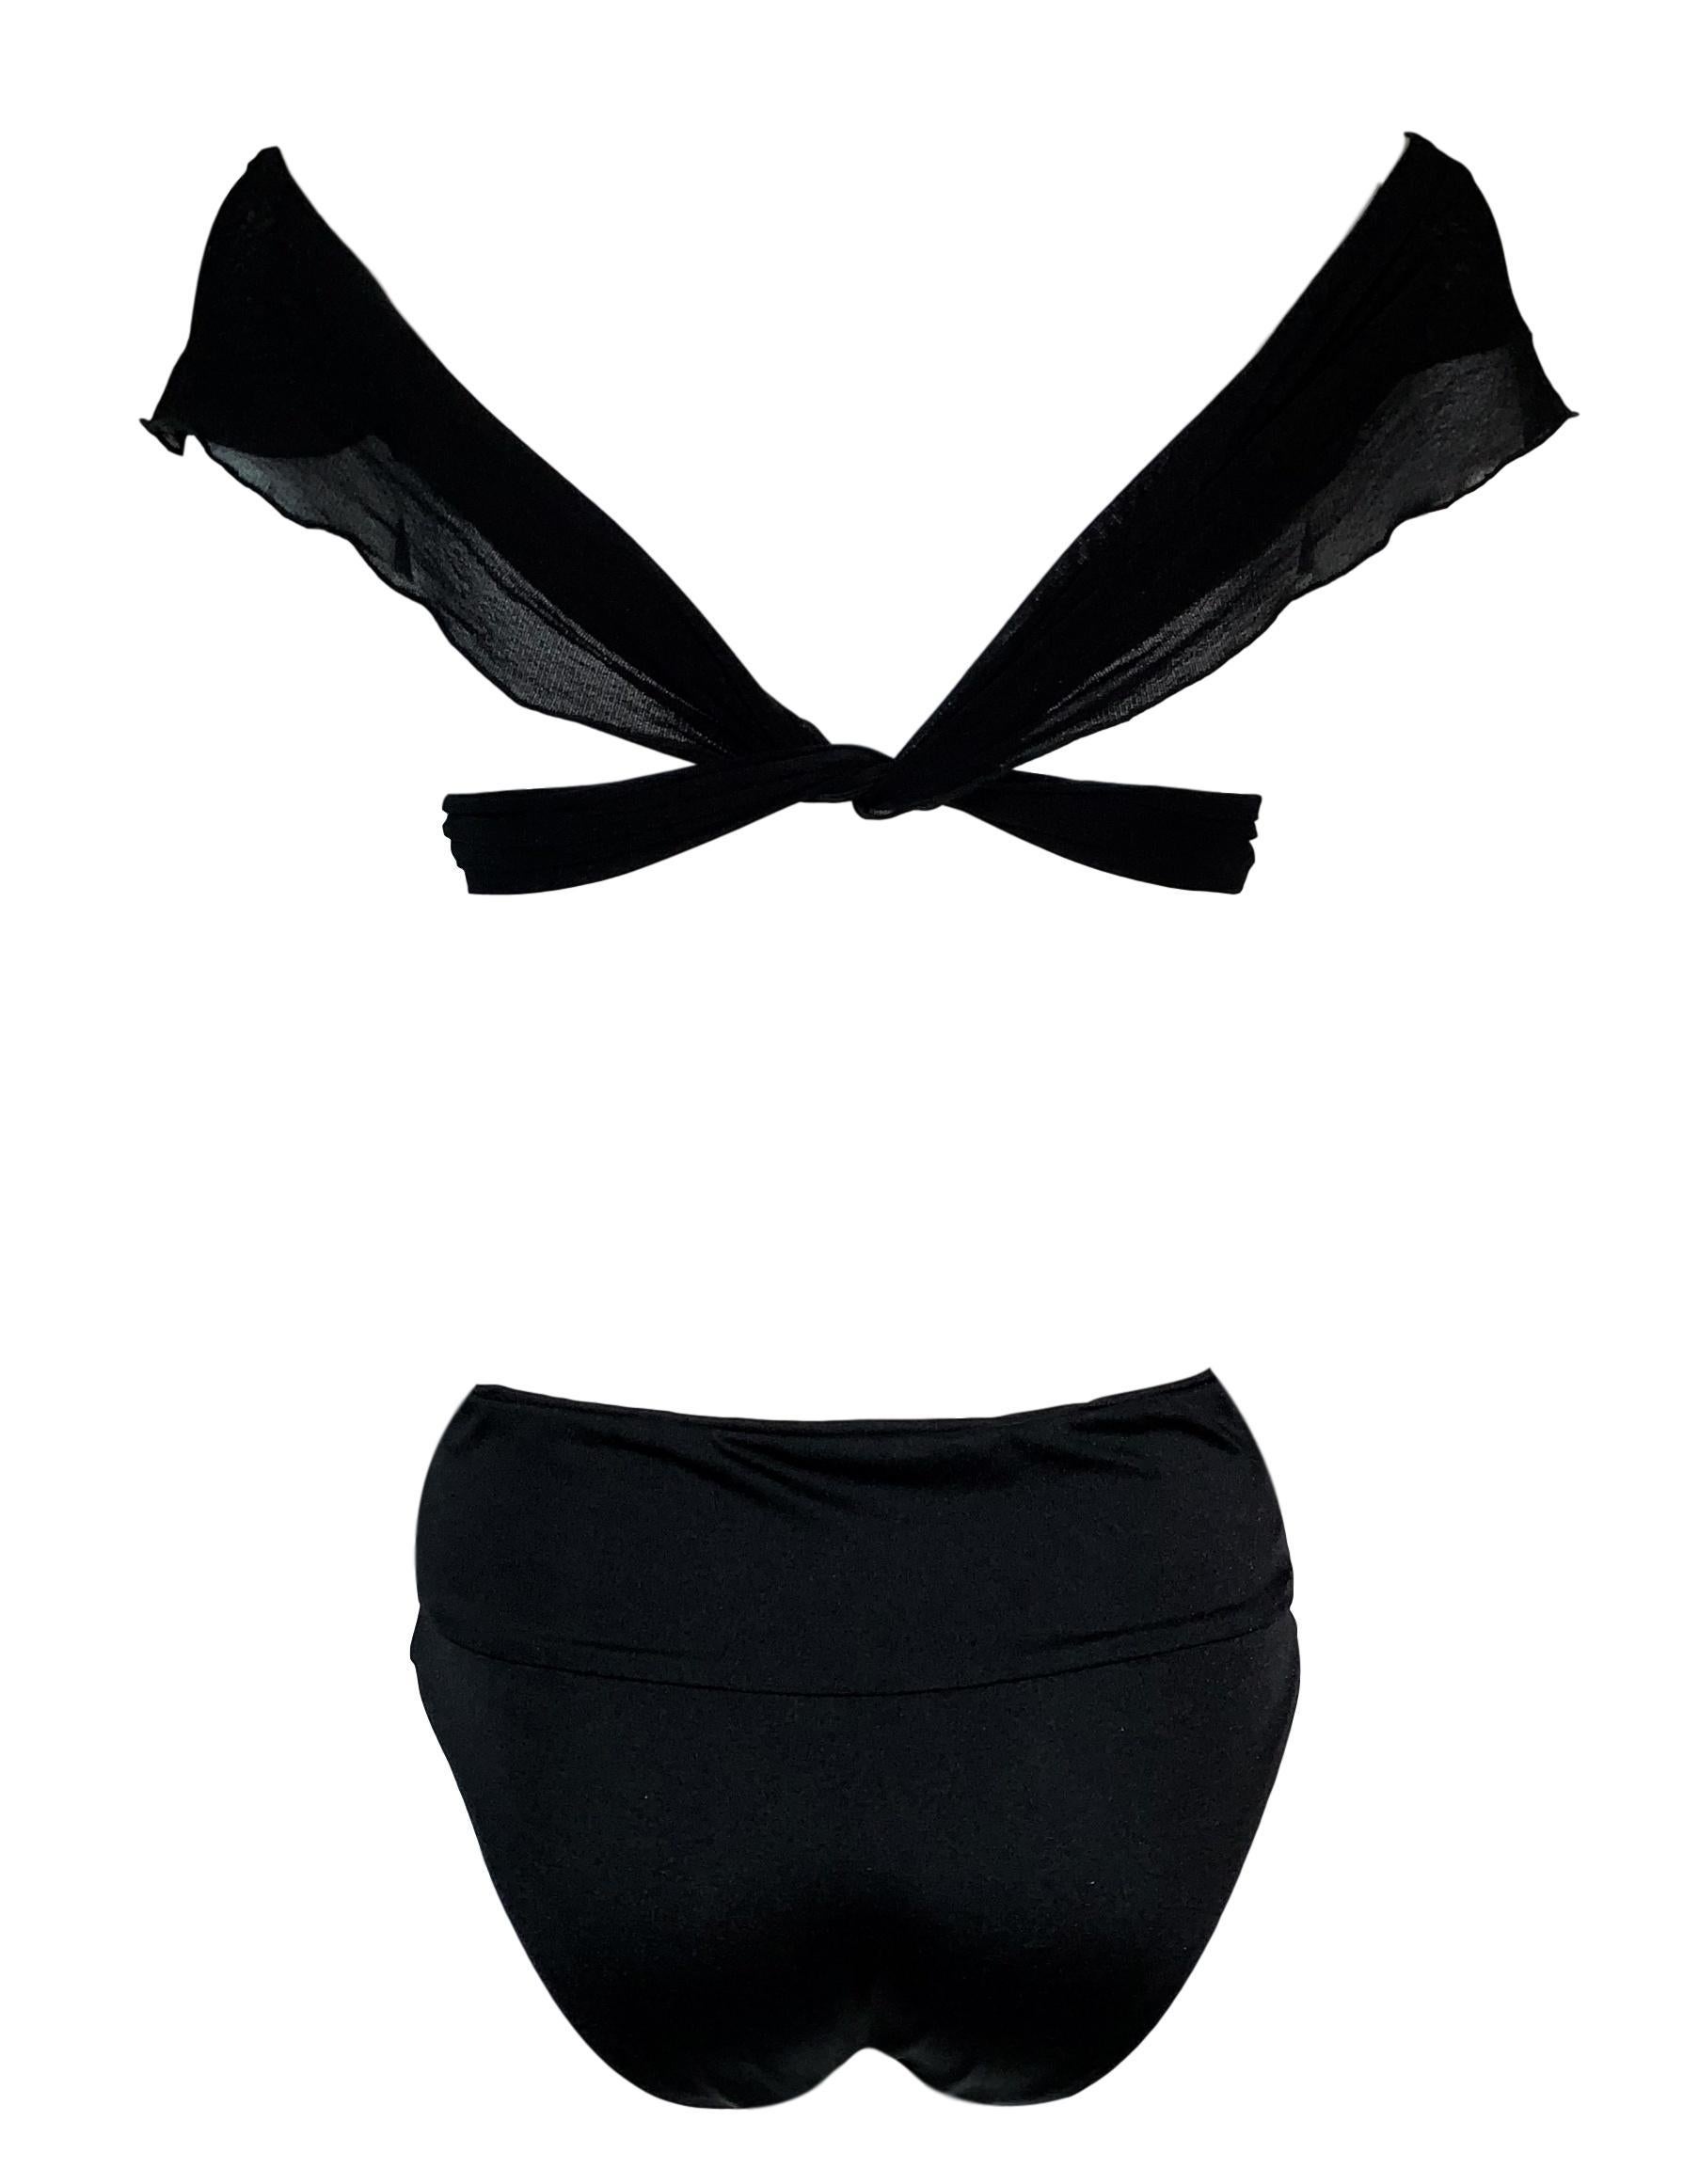 S/S 2005 Gucci Black Cut-Out Tie-Up Swimsuit Bodysuit In Good Condition In Yukon, OK